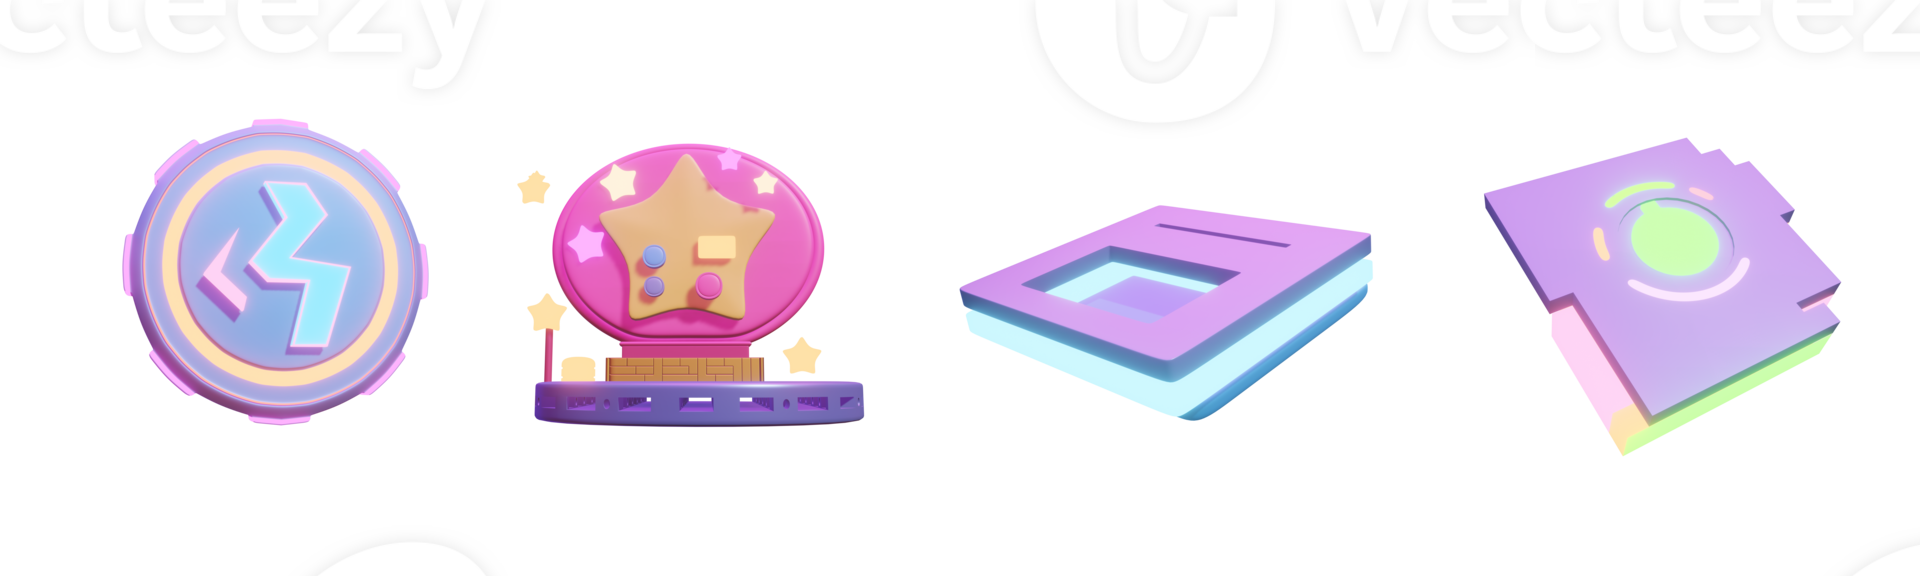 3D icon video games collection rendered isolated on the transparent background. power up icon, high score, load icon, and save icon object for your design. png